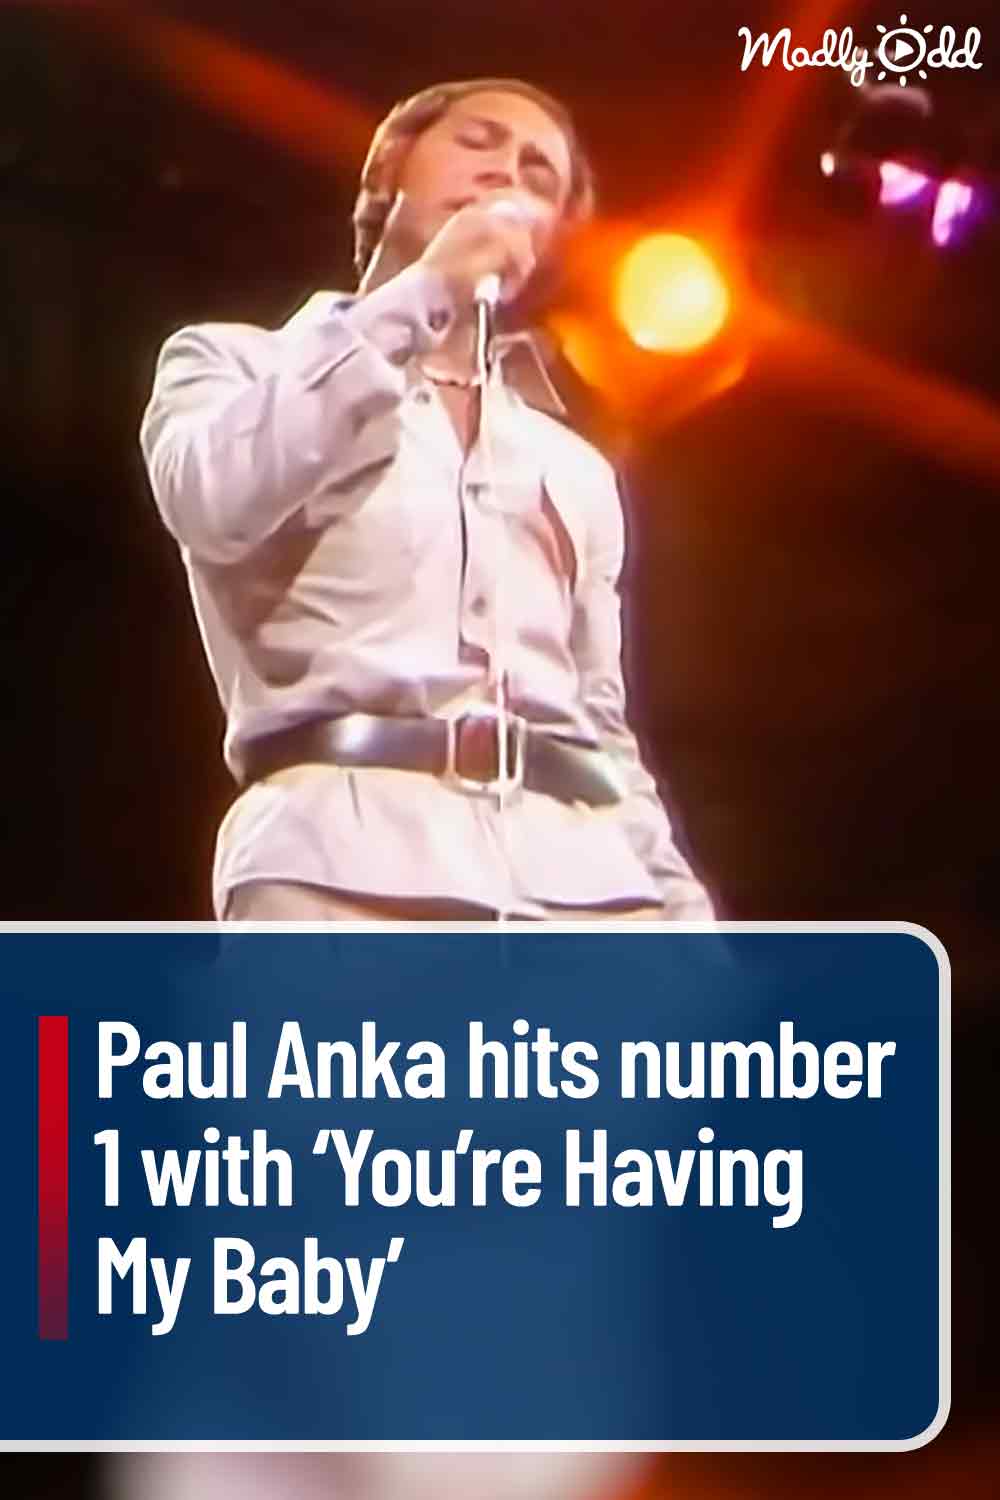 Paul Anka hits number 1 with ‘You’re Having My Baby’